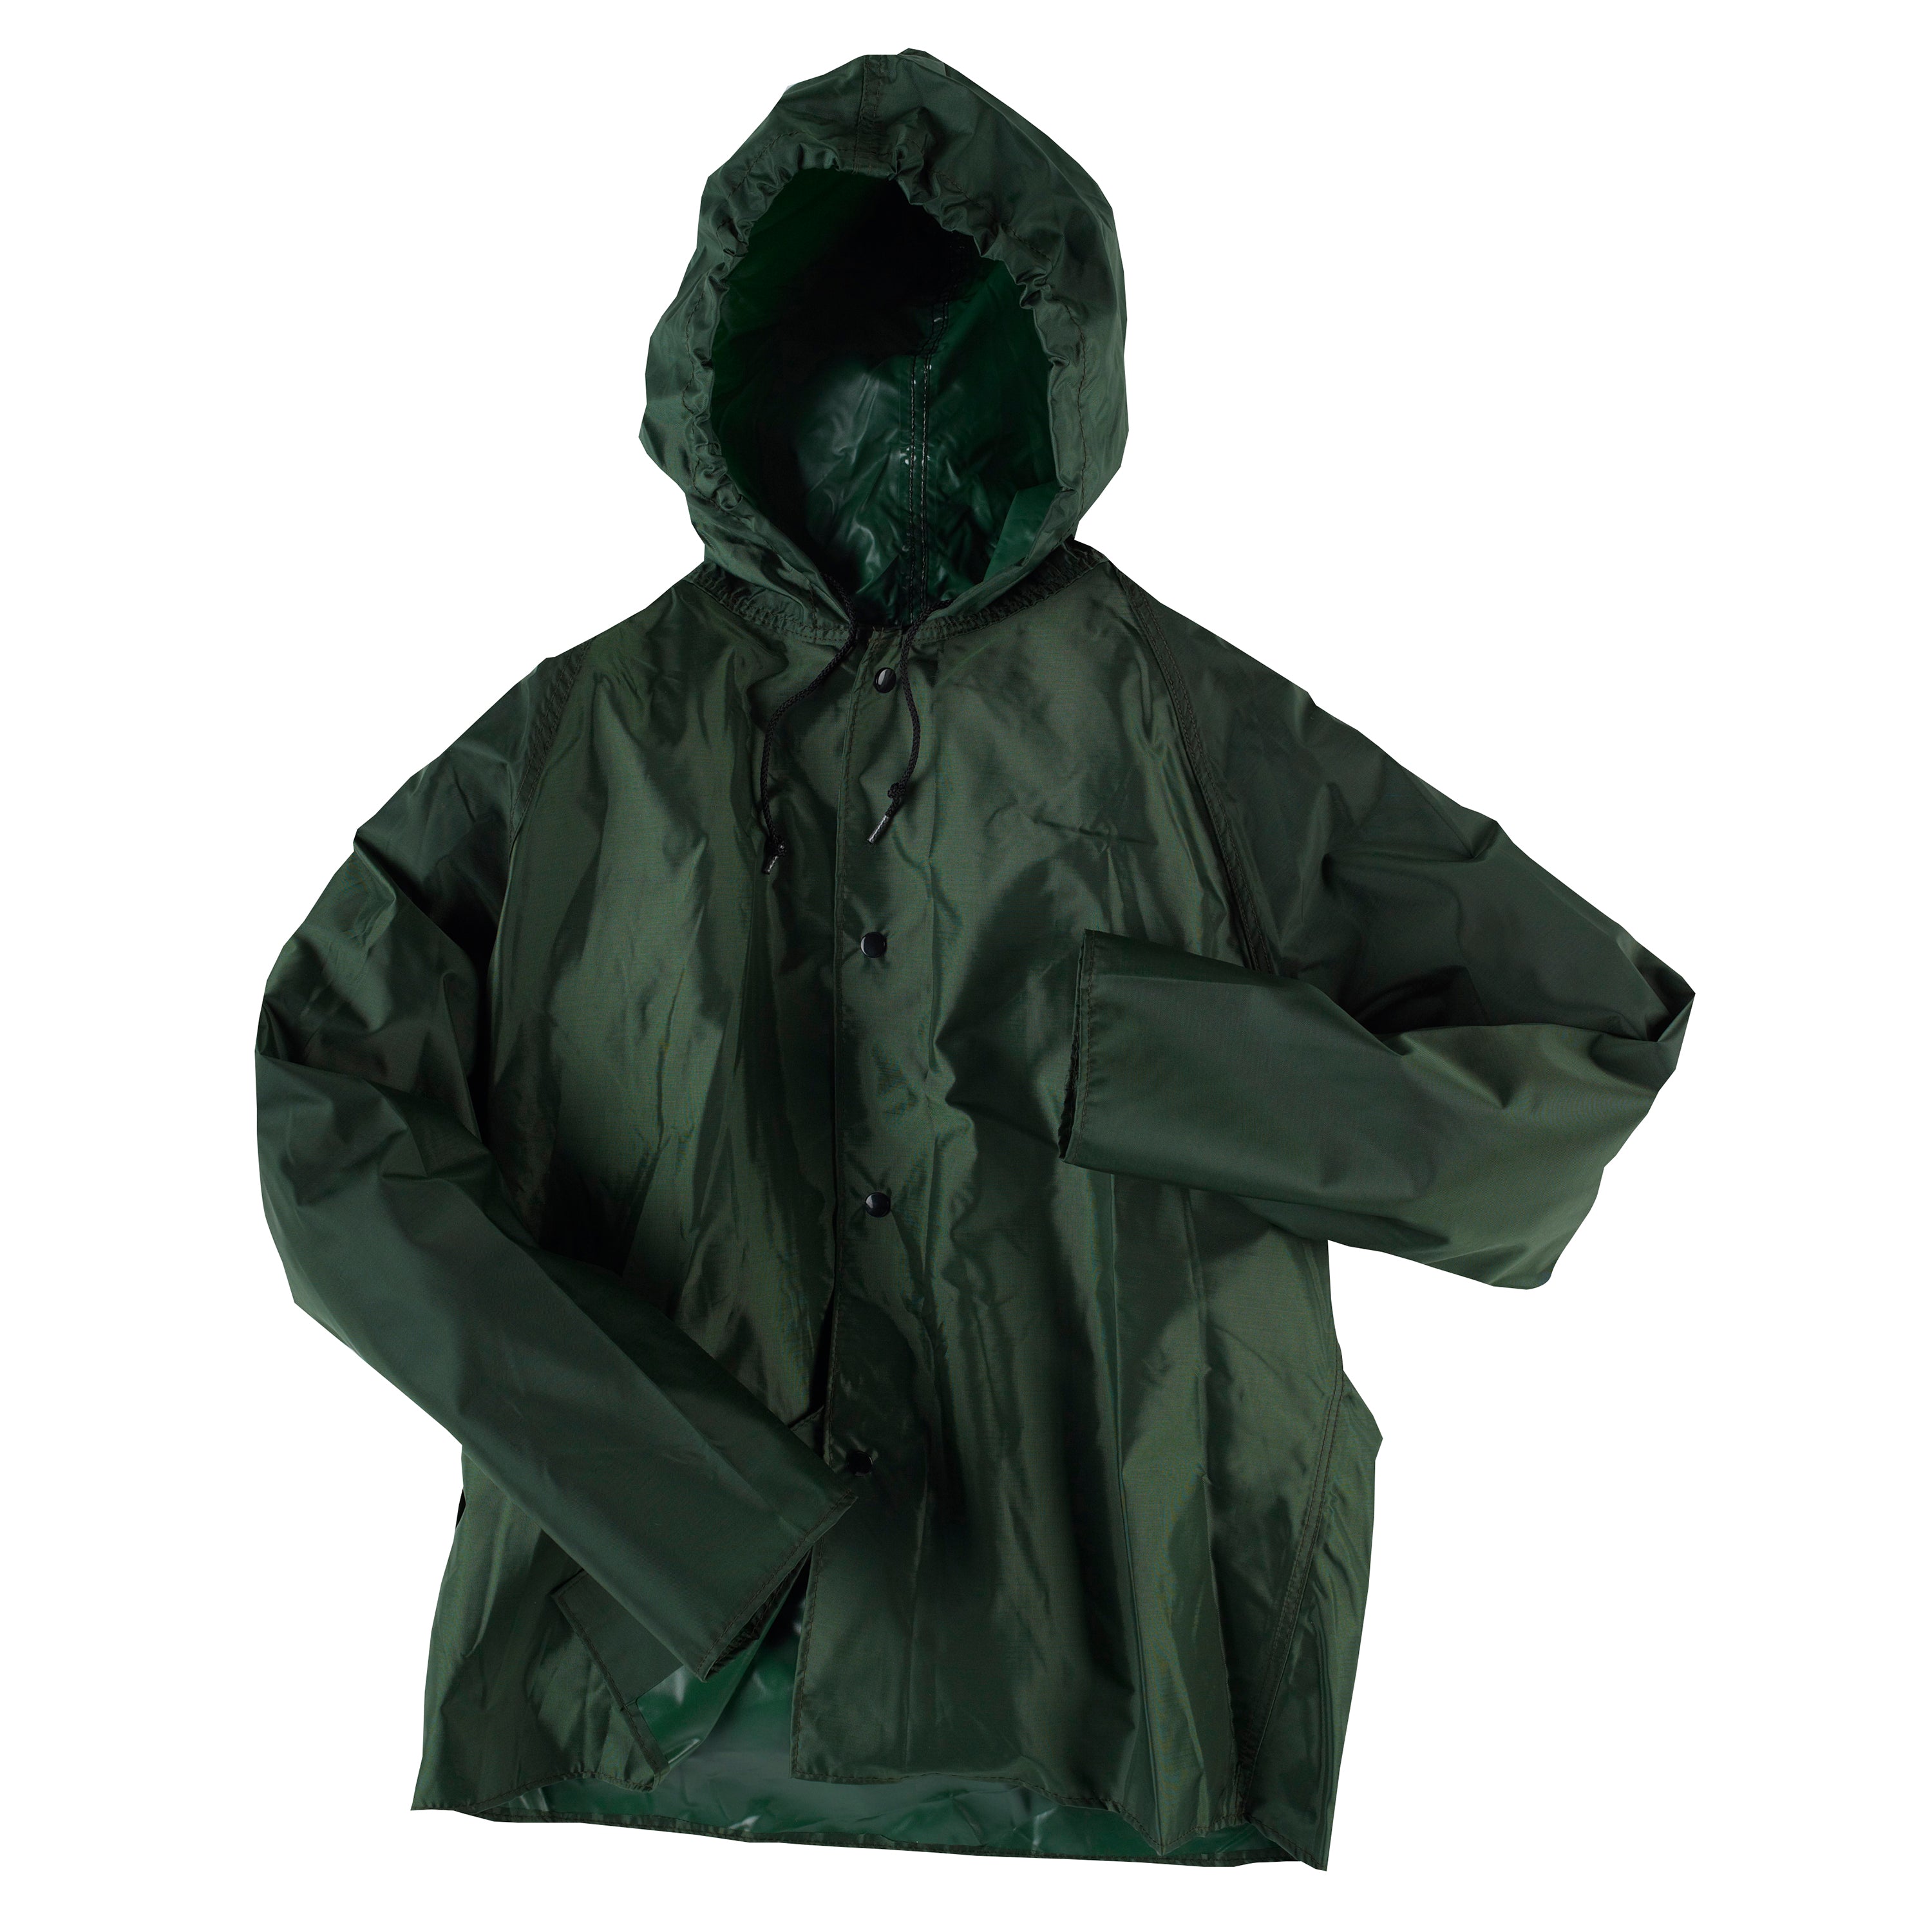 Neese 60AJ Outworker Jacket with Hood-eSafety Supplies, Inc